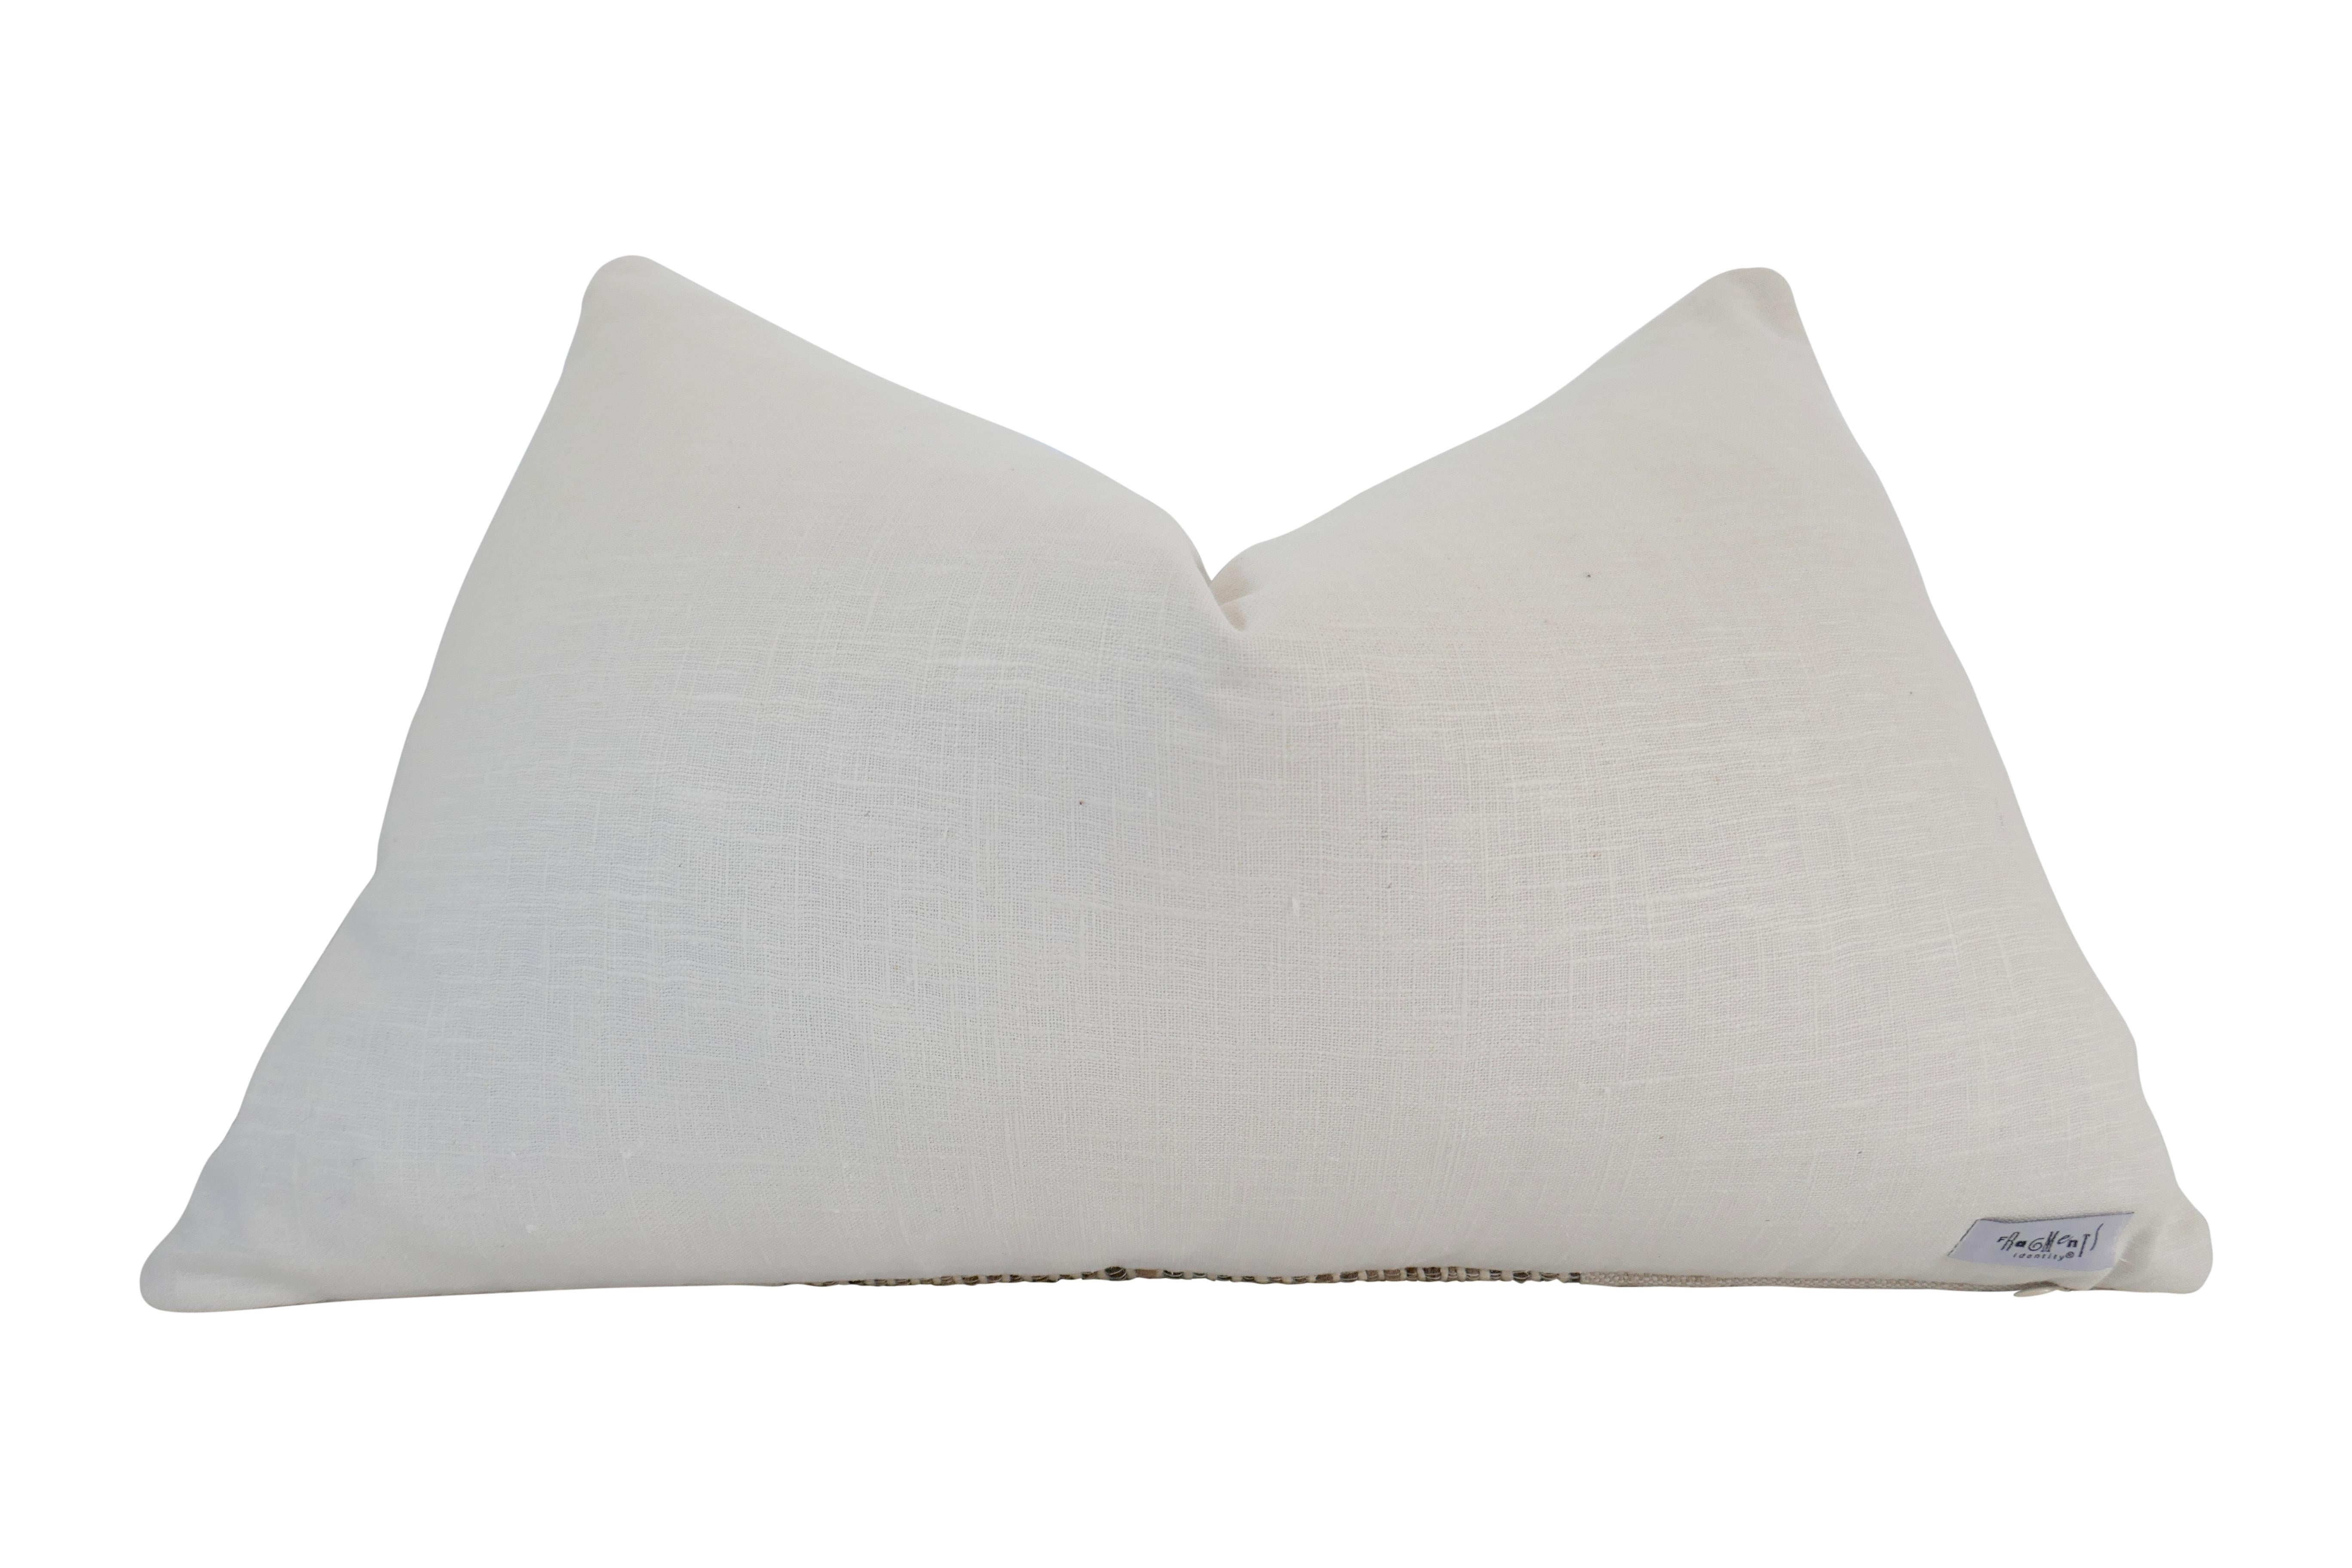 FI Vintage Hand-Spun French Linen & Italian Rolled Silk Pillow In Excellent Condition For Sale In thousand oaks, CA